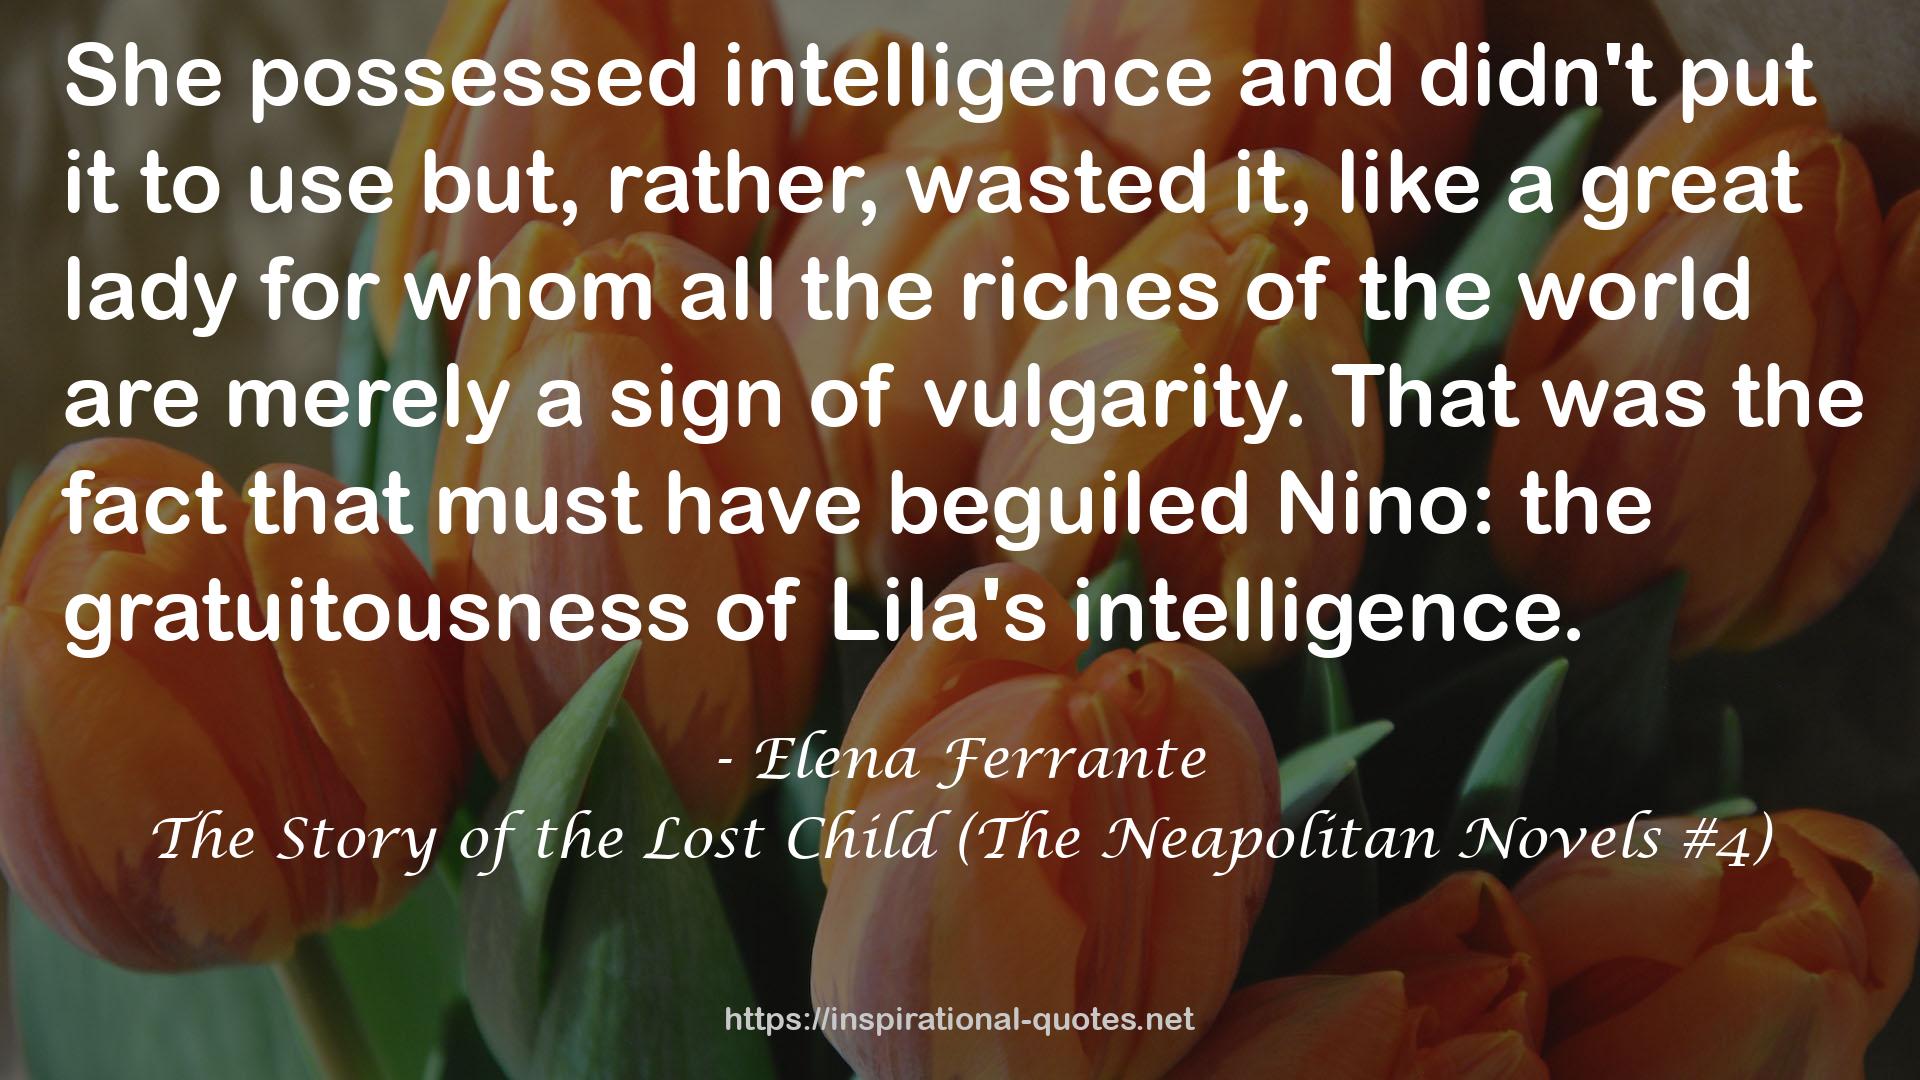 The Story of the Lost Child (The Neapolitan Novels #4) QUOTES